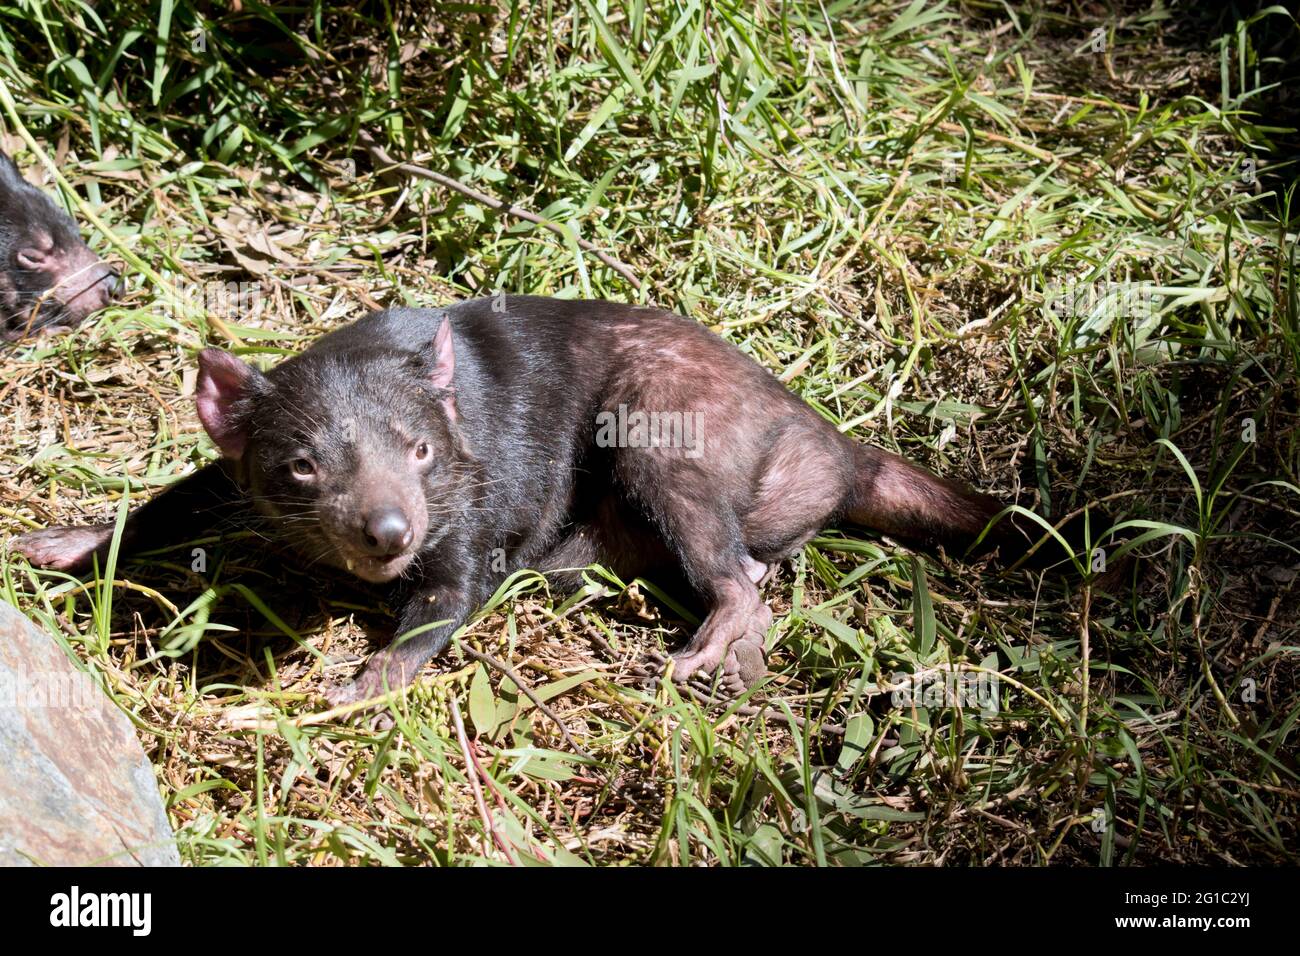 the Tasmanian devil is resting on the grass Stock Photo